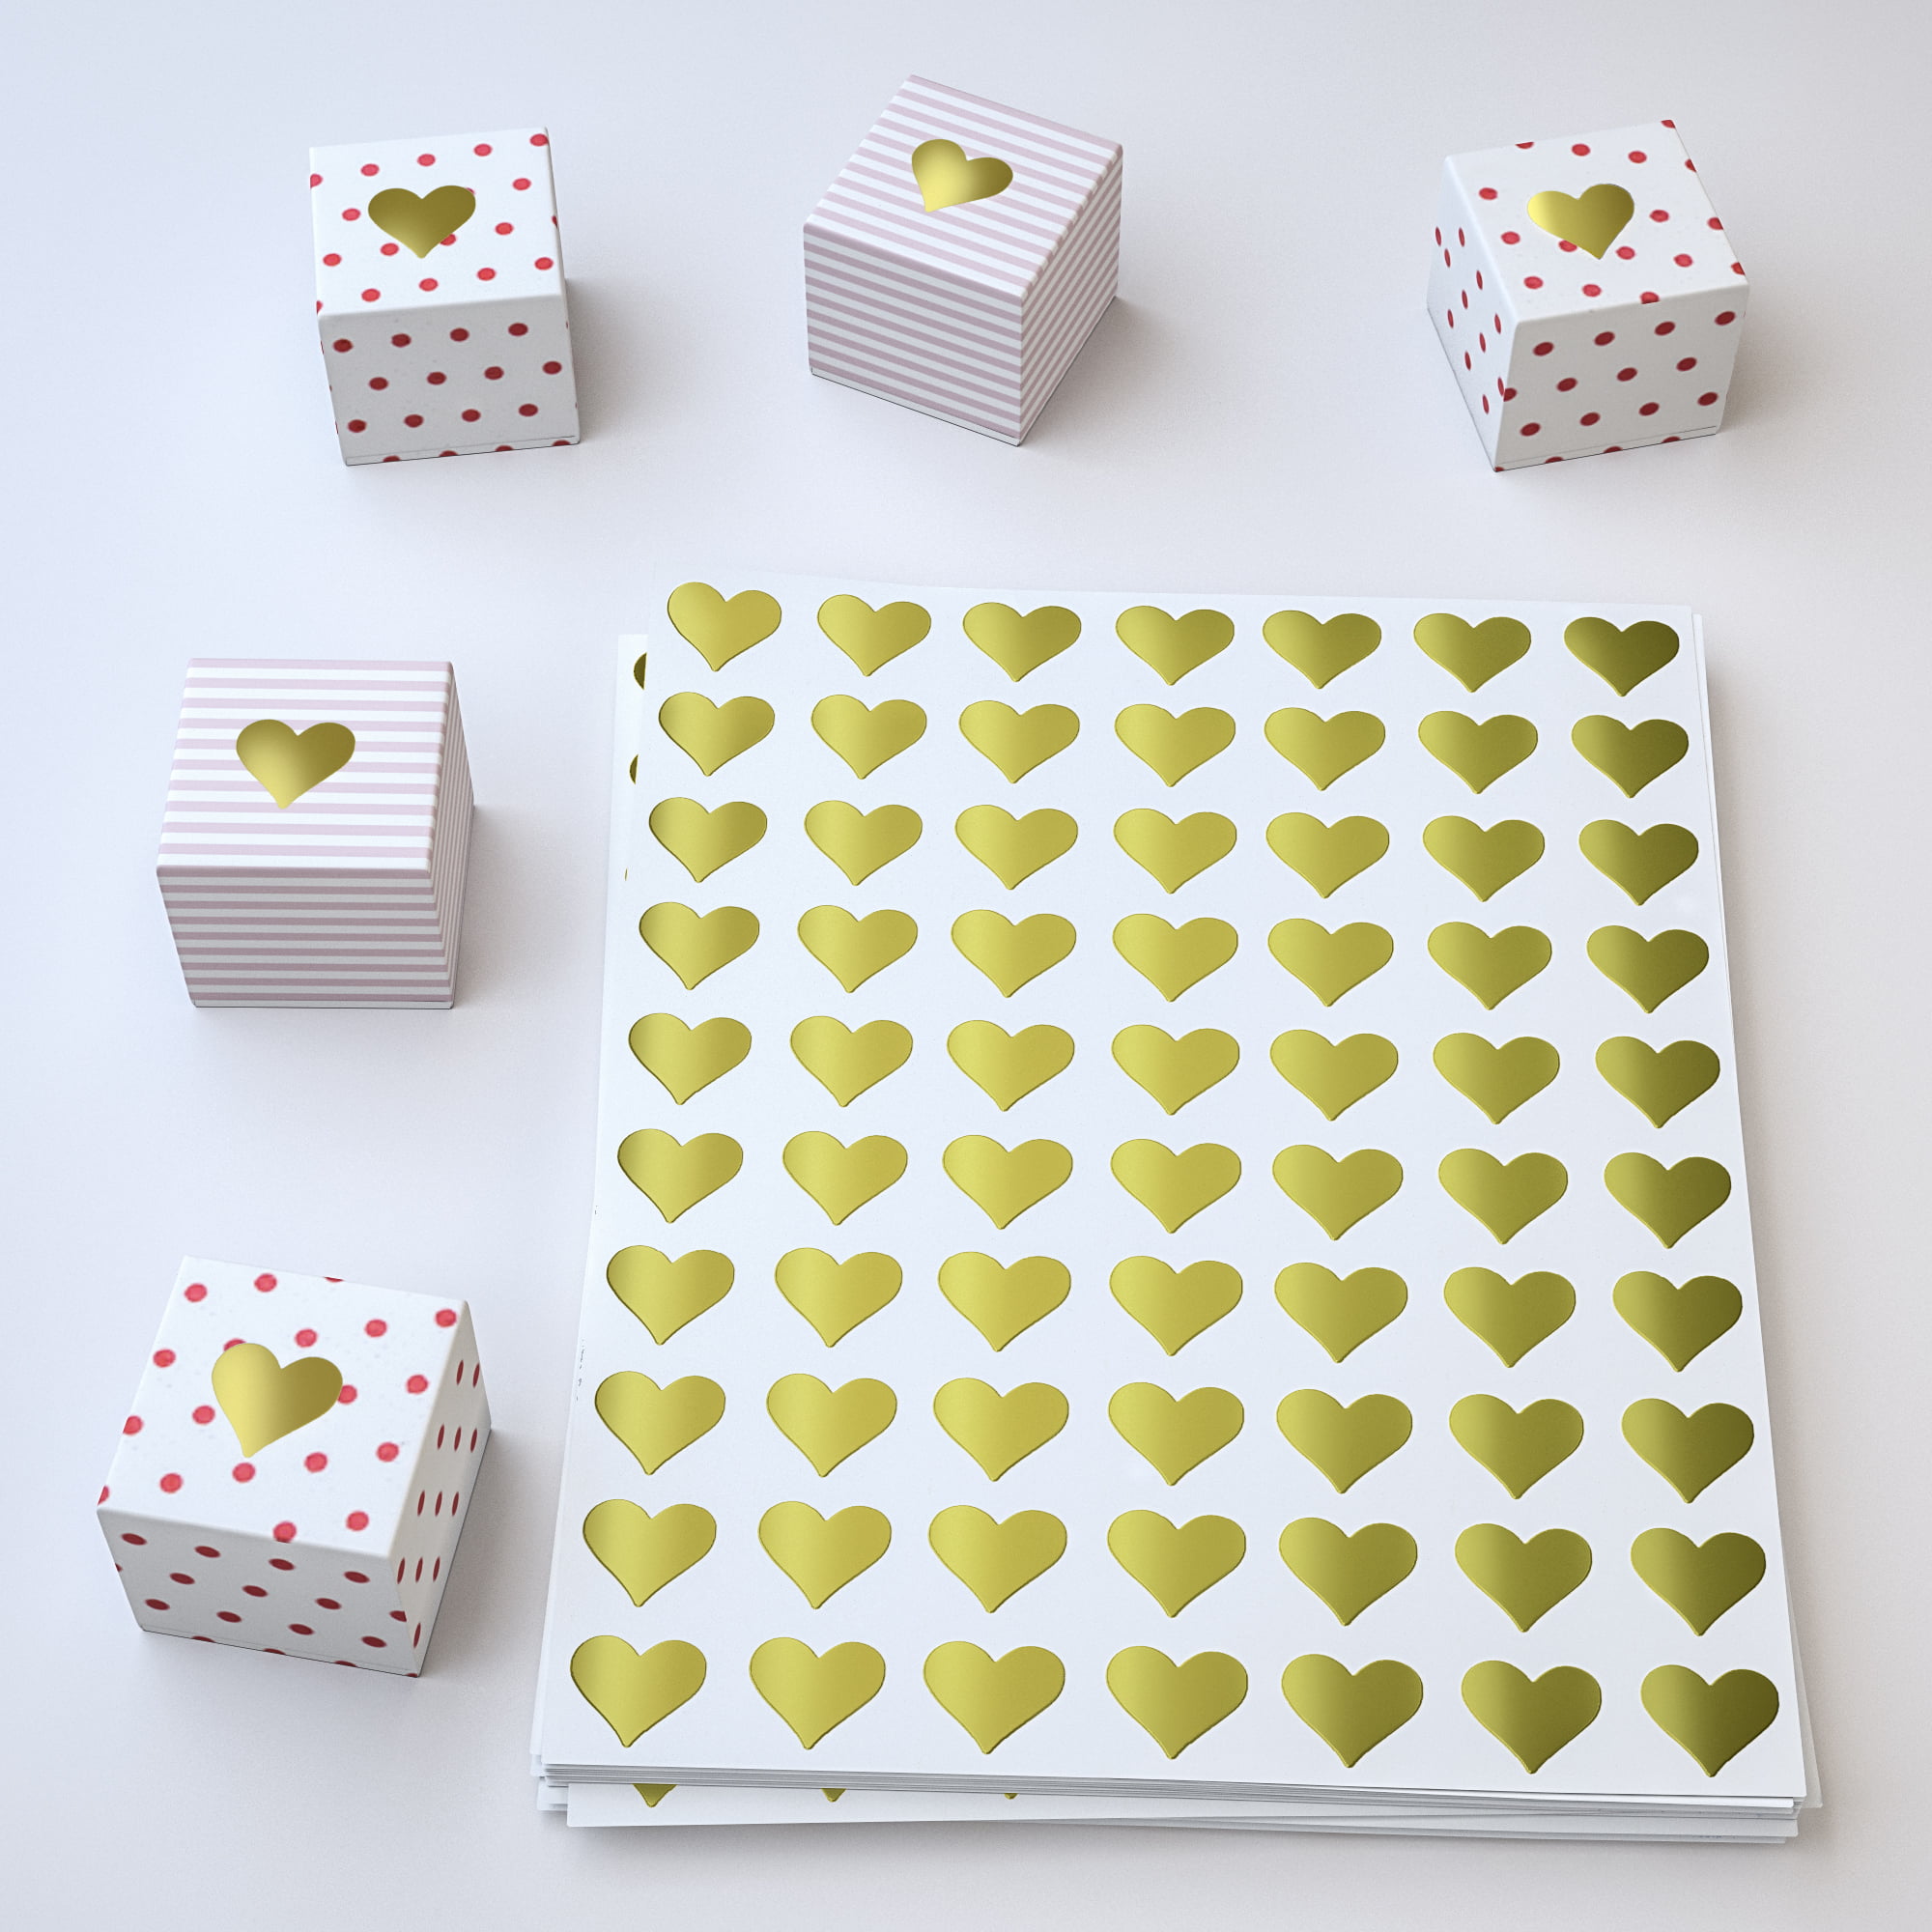 Decoration in 0.5 inch 13mm Party Favors 1/2-350 Pack Royal Green Foil Gold Hearts Stickers for Weddings 